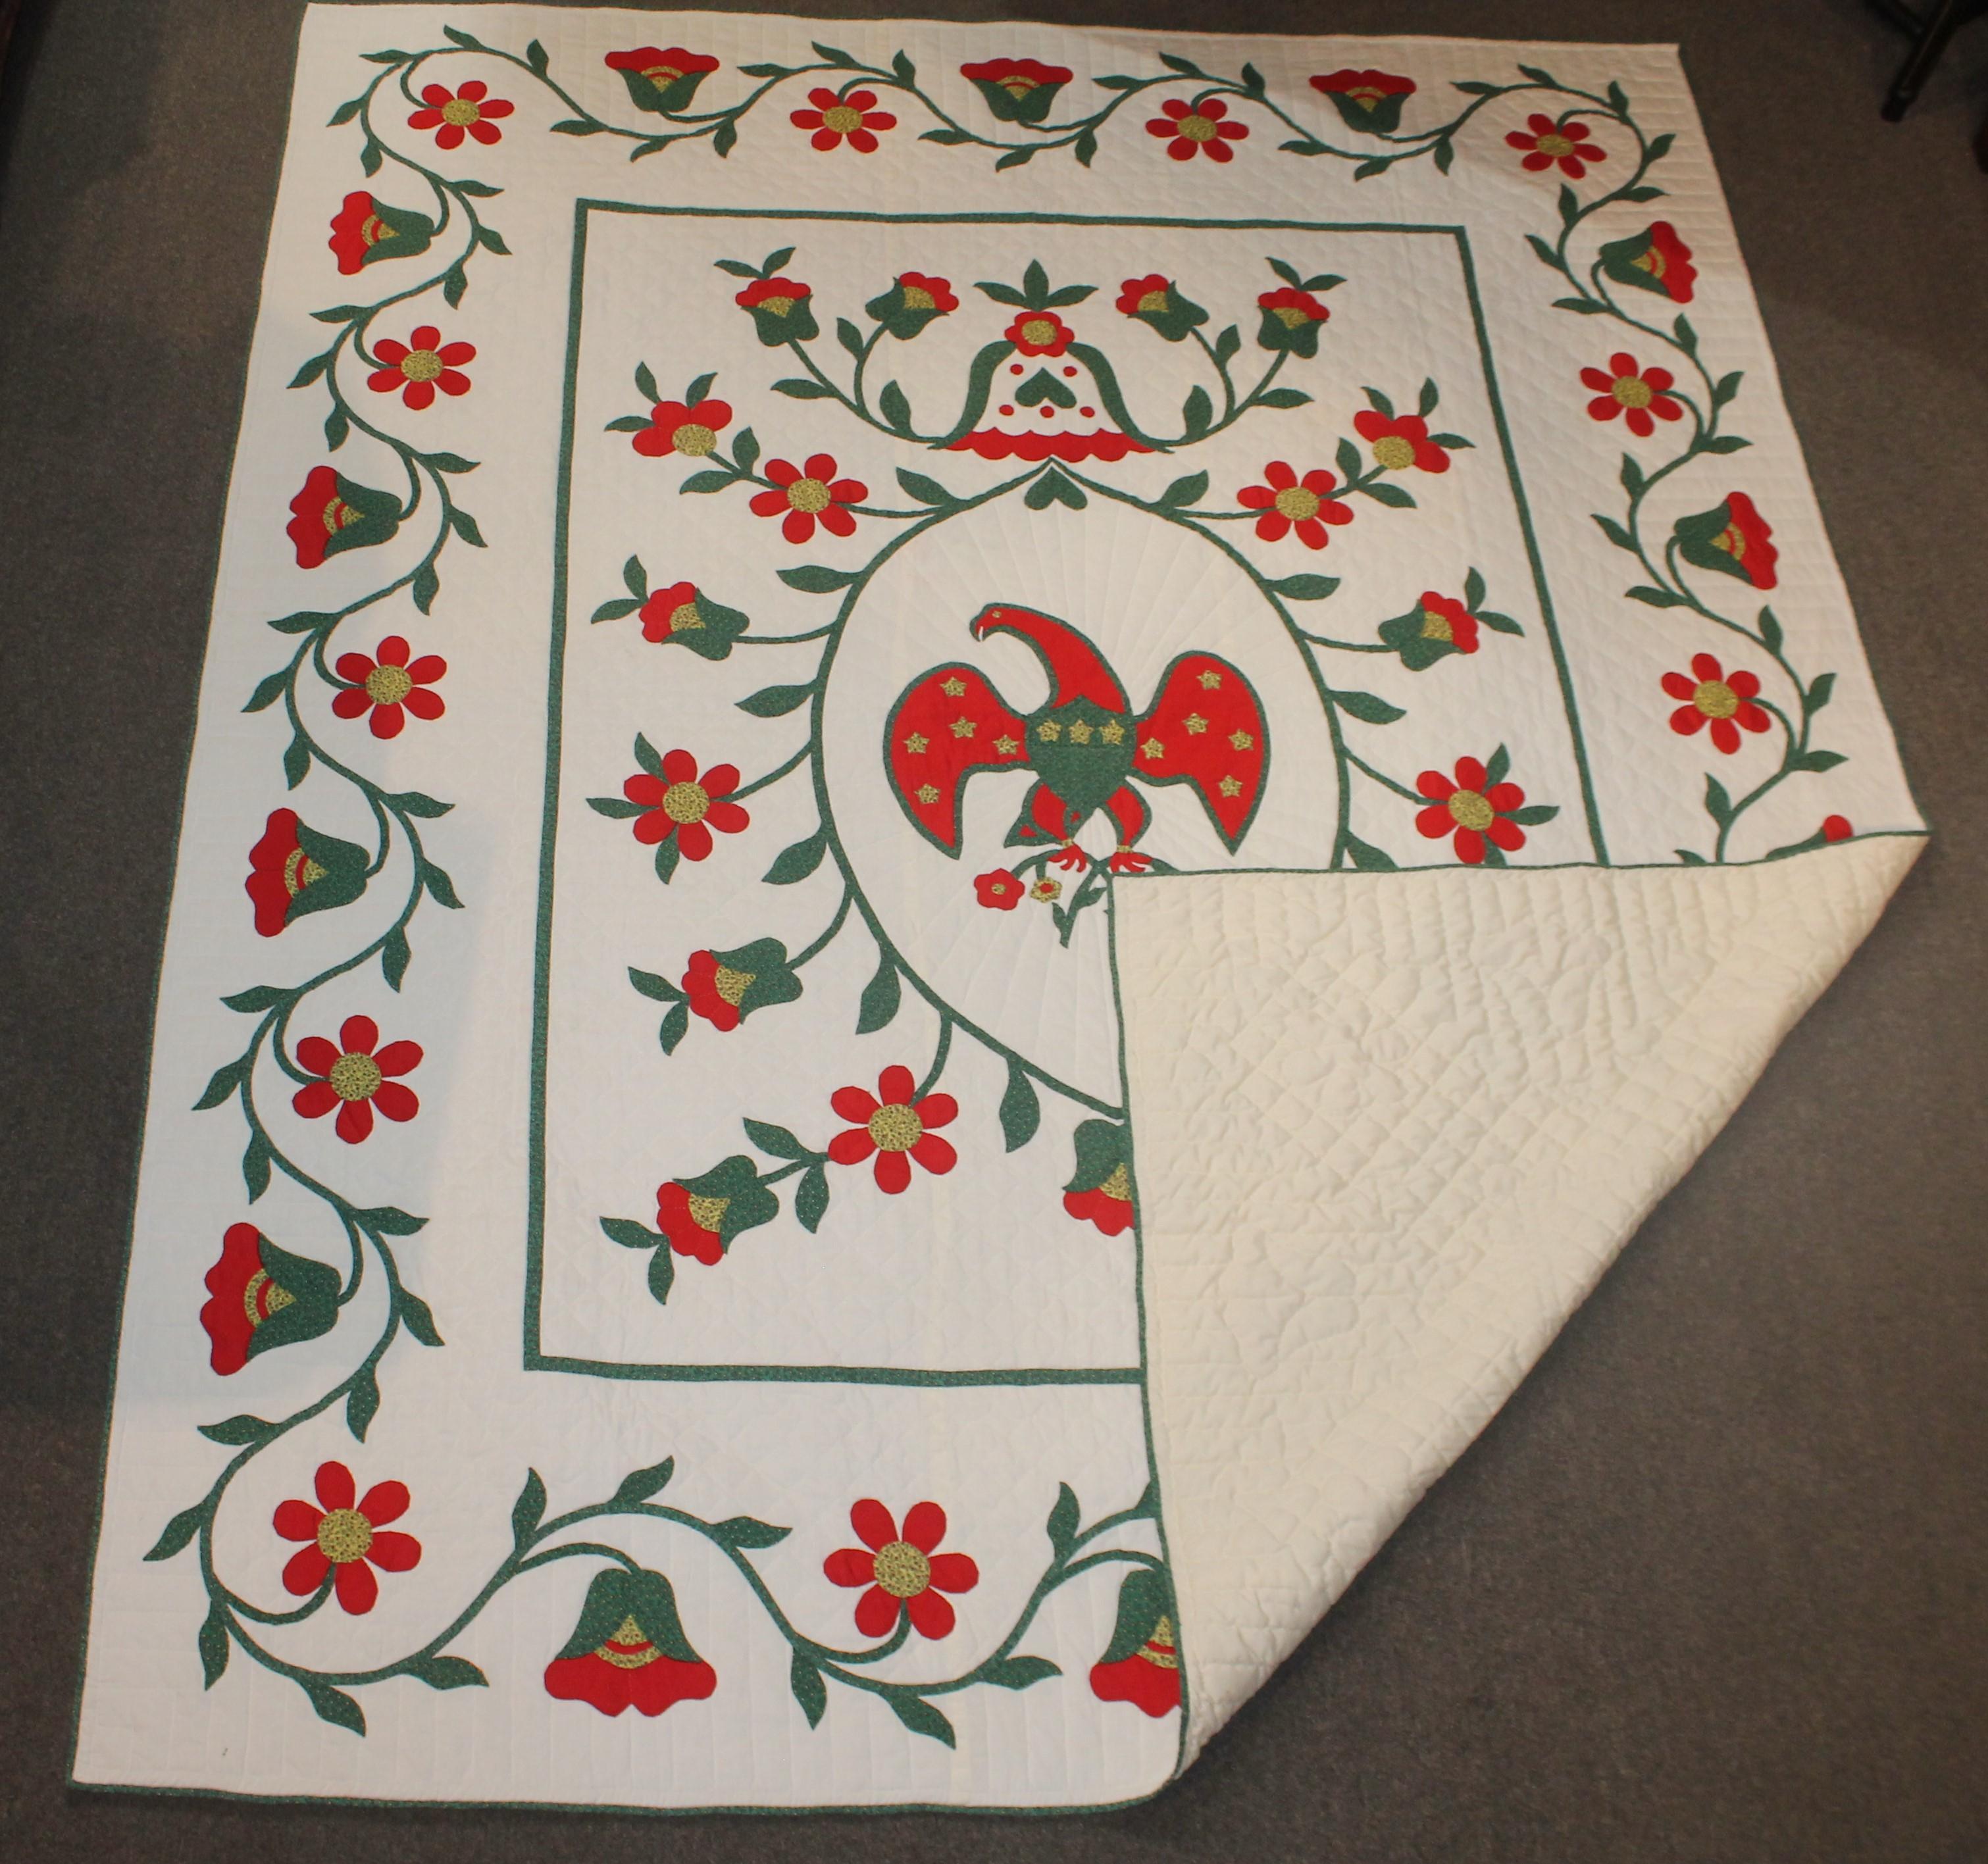 Fantastic eagle applique quilt with a wonderful tulip and vine border. The condition is very good. It is amazing and graphic. This quilt is from Lancaster County, Pennsylvania.